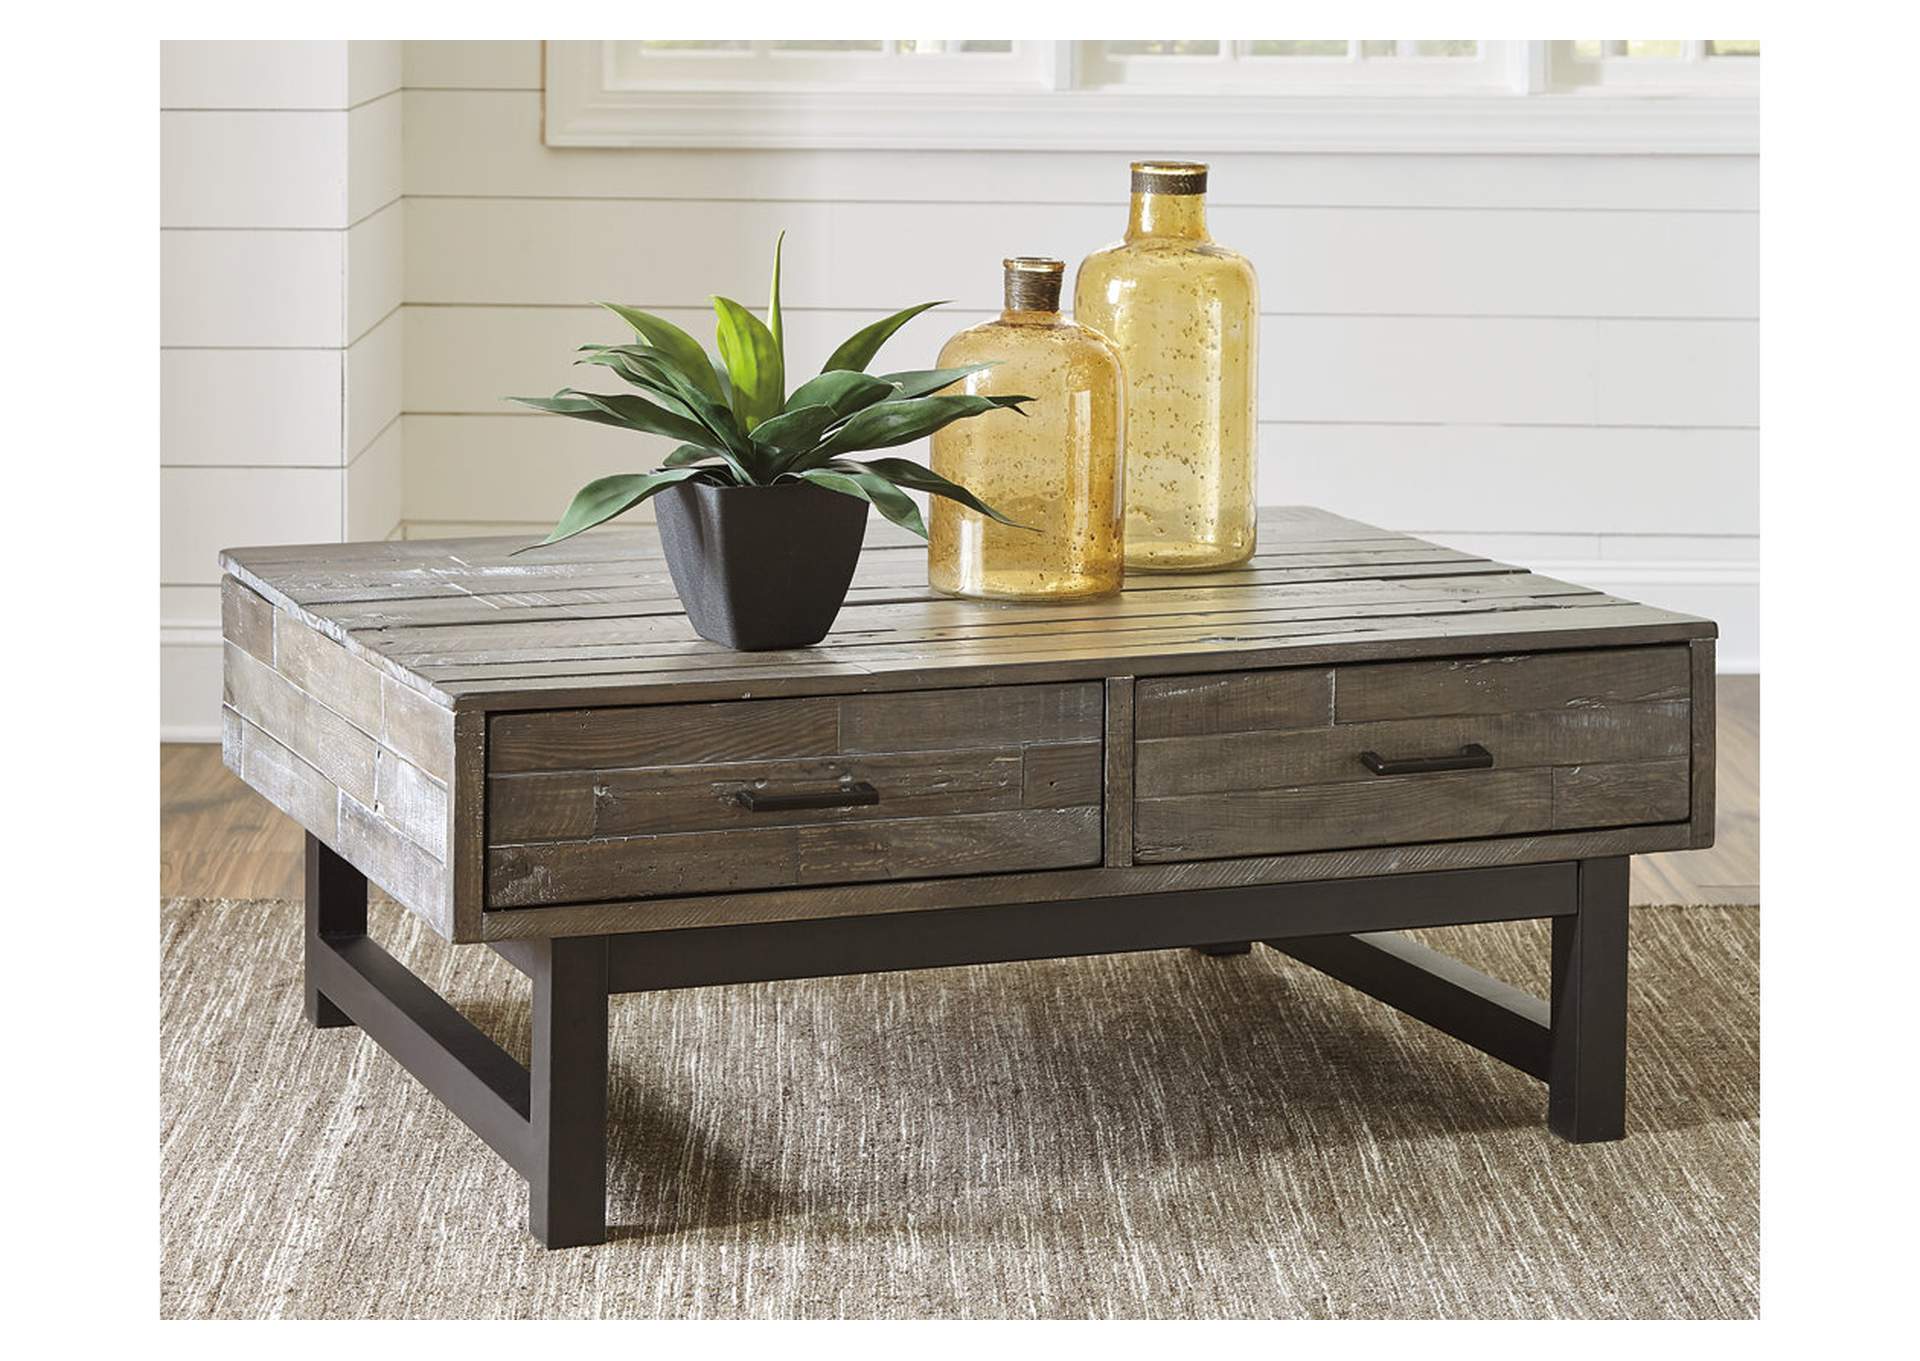 Mondoro Coffee Table with Lift Top,Signature Design By Ashley